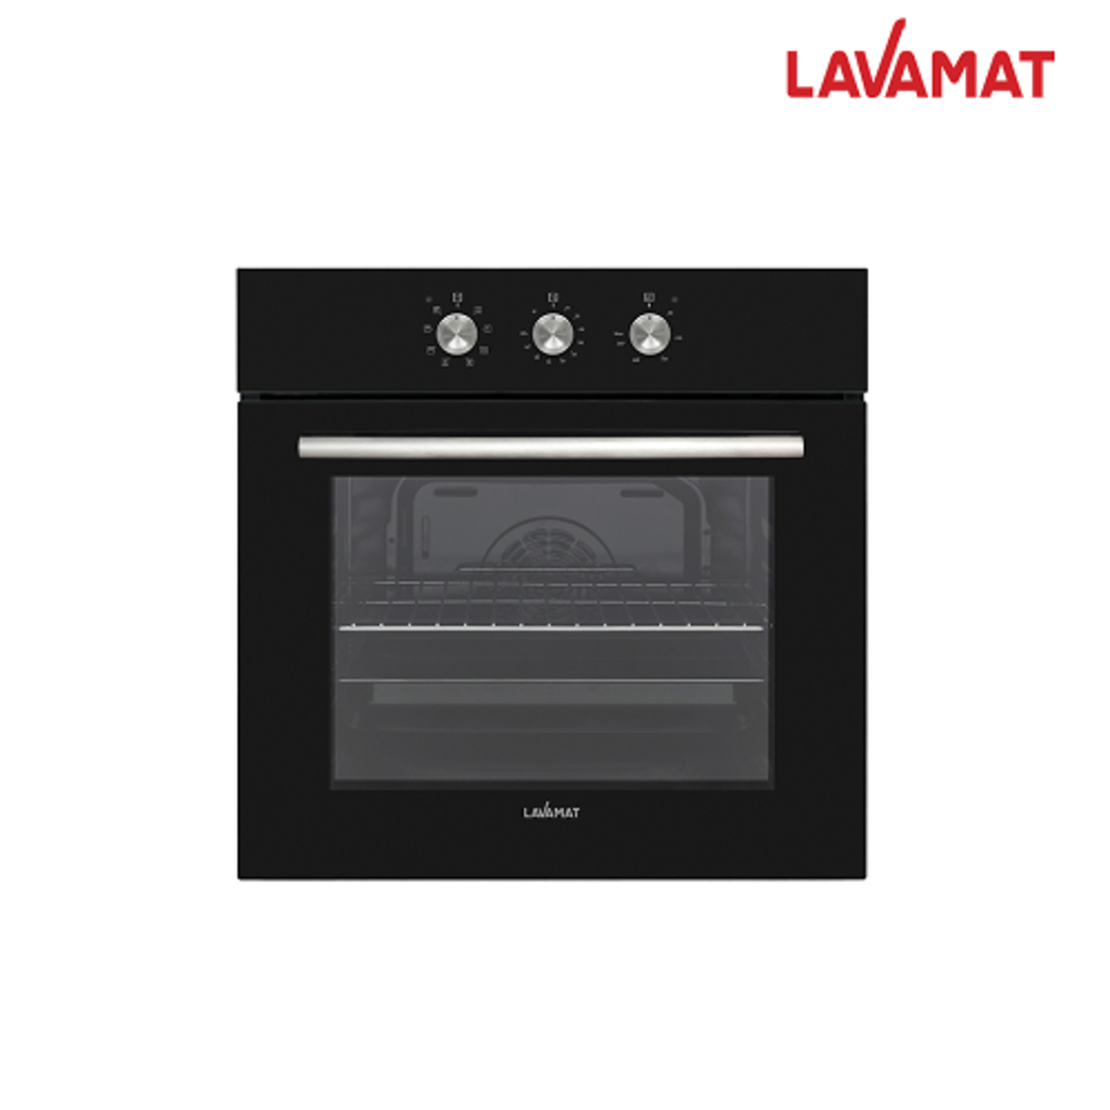 LAVAMAT built in oven LVO-30222